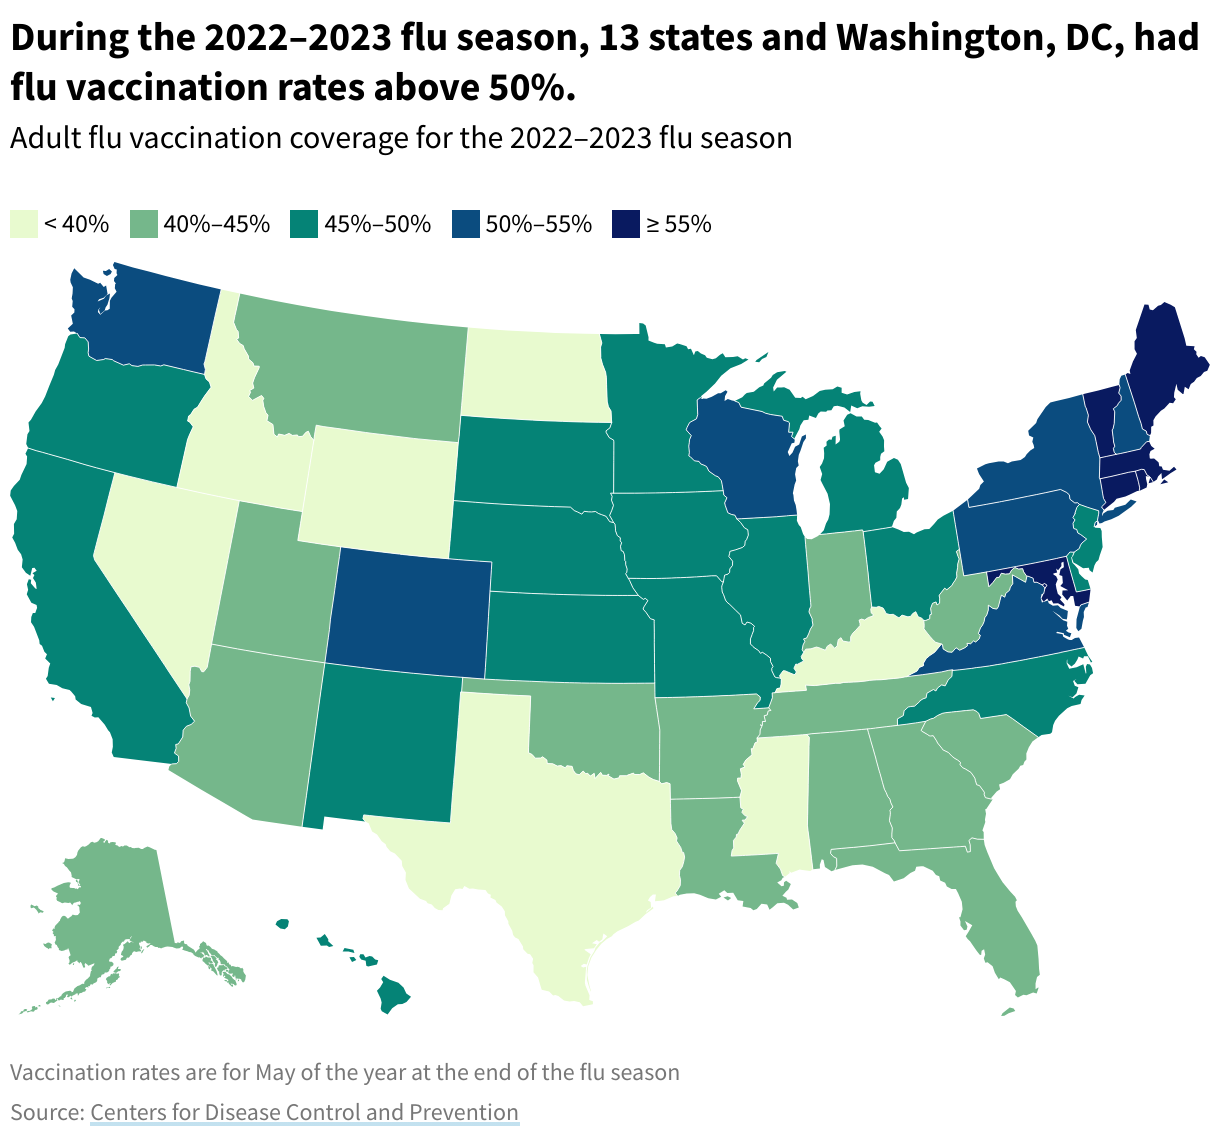 Map of the US showing flu vaccination rates by state in the 2022-2023 flu season. 